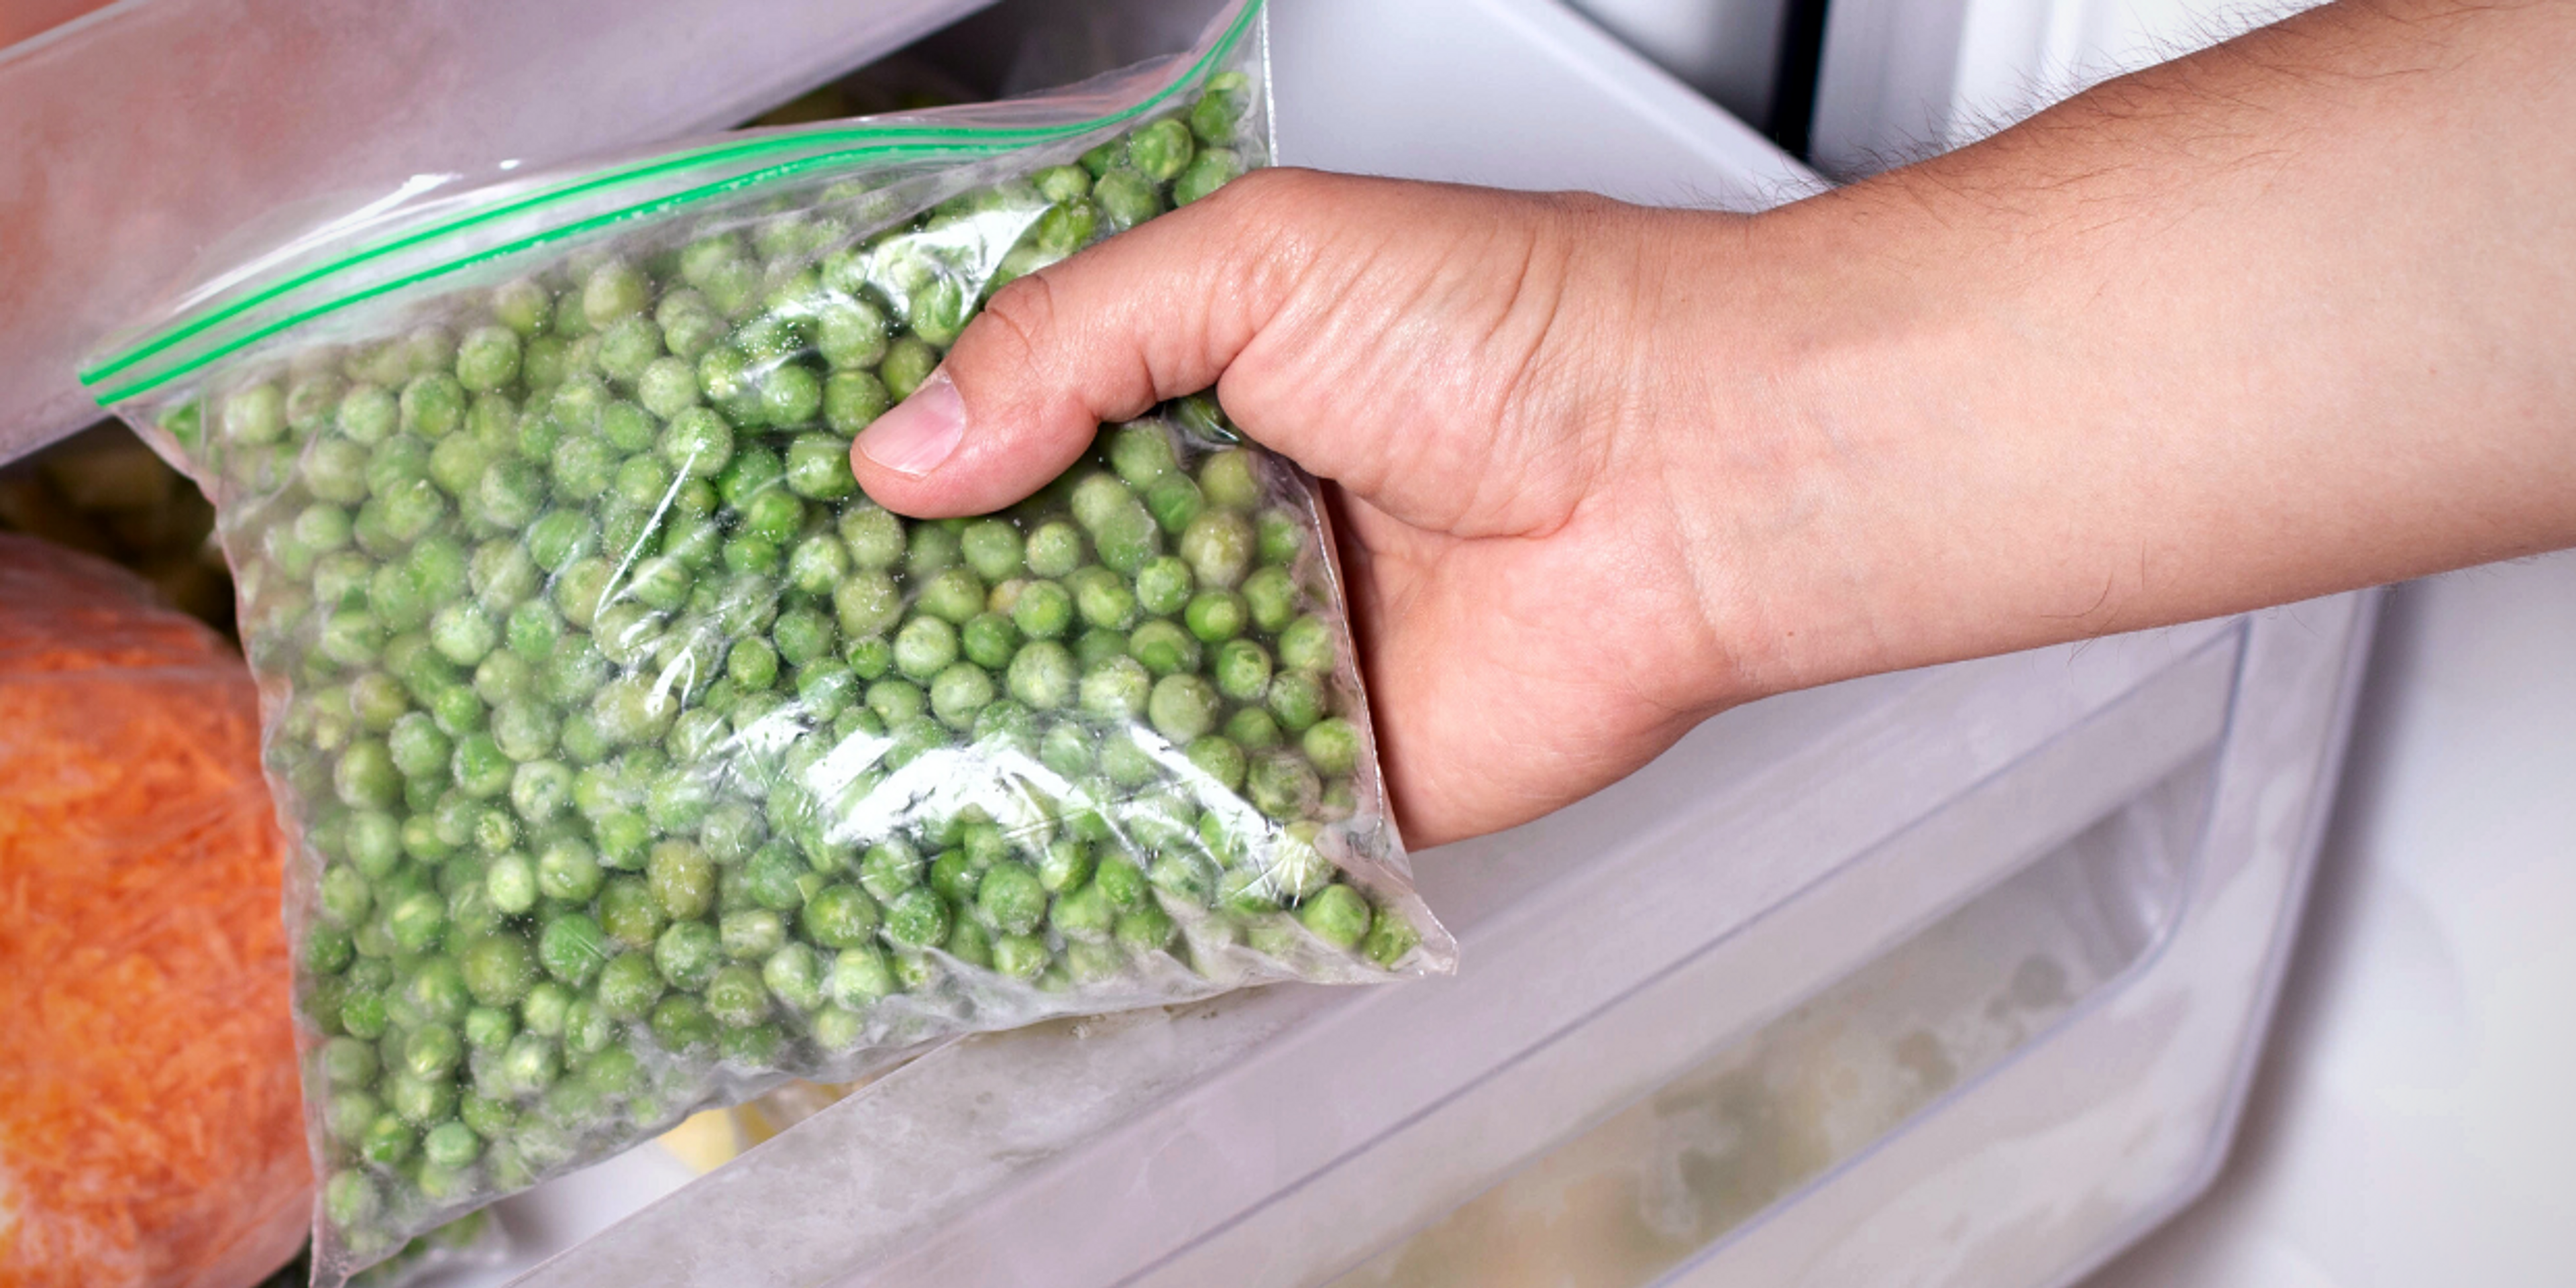 A packet of frozen peas works really well for icing calf strains, as it molds to the shape of your calf.